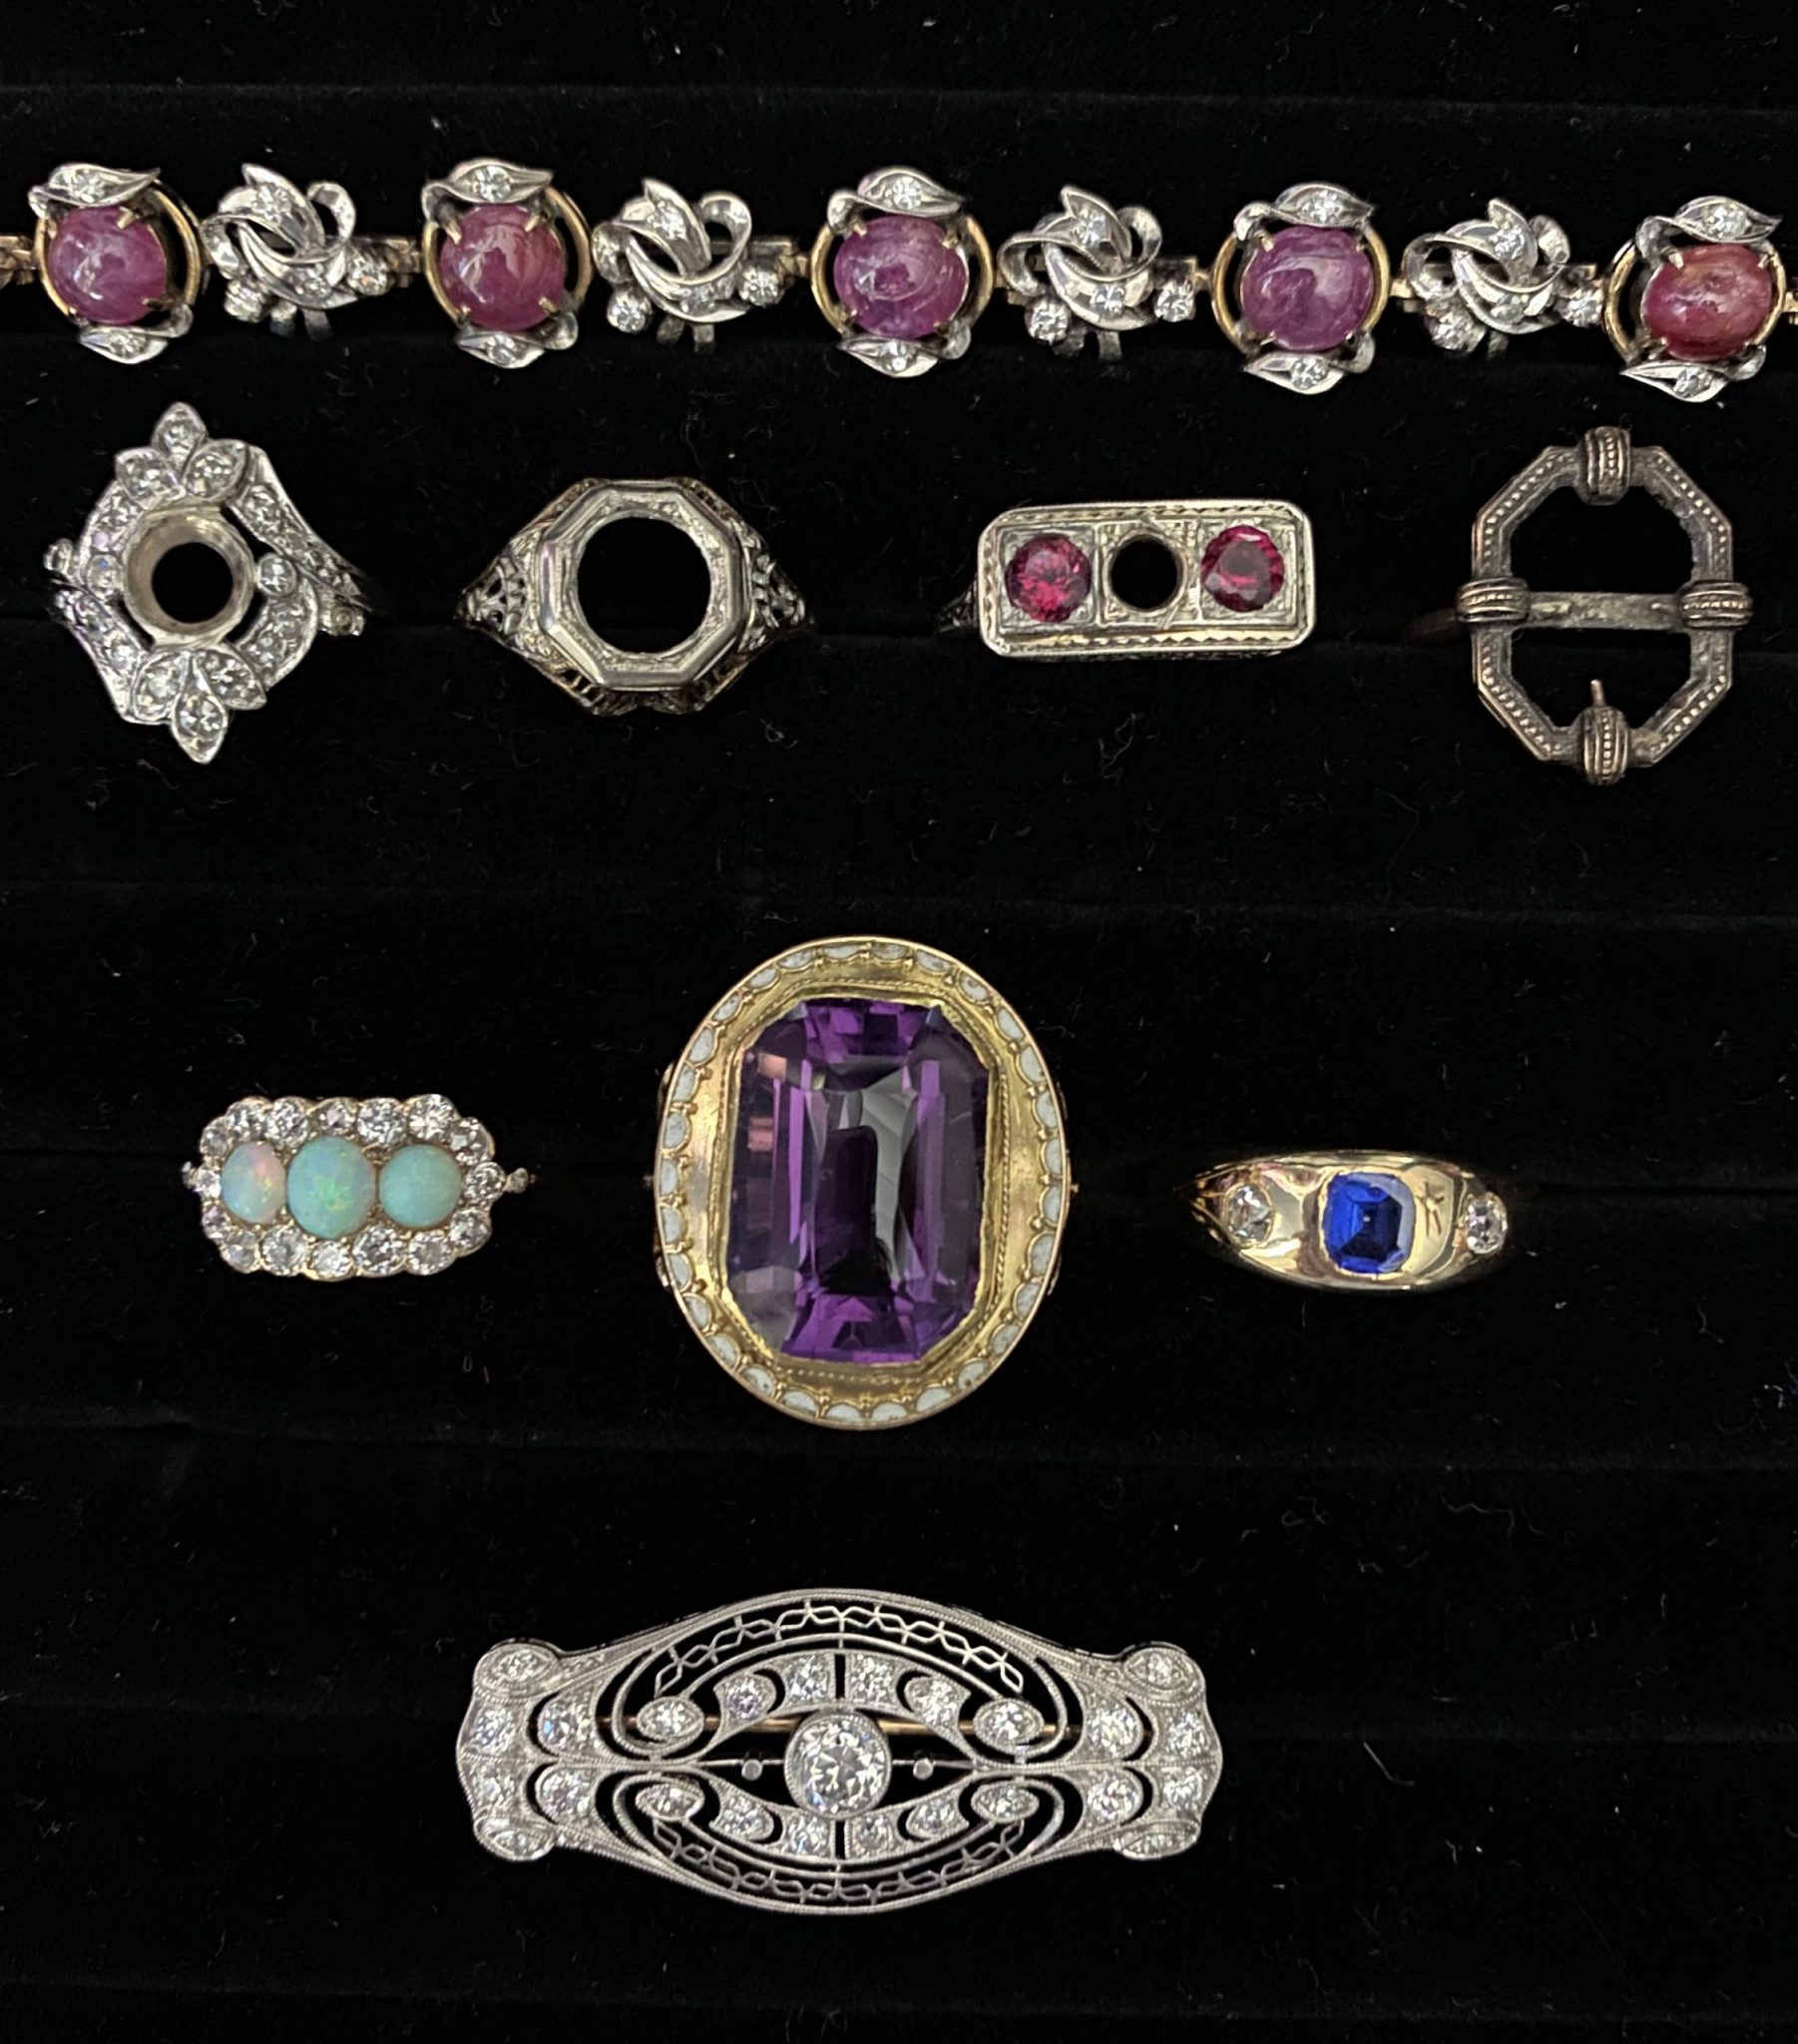 A grouping of antique and vintage jewelry